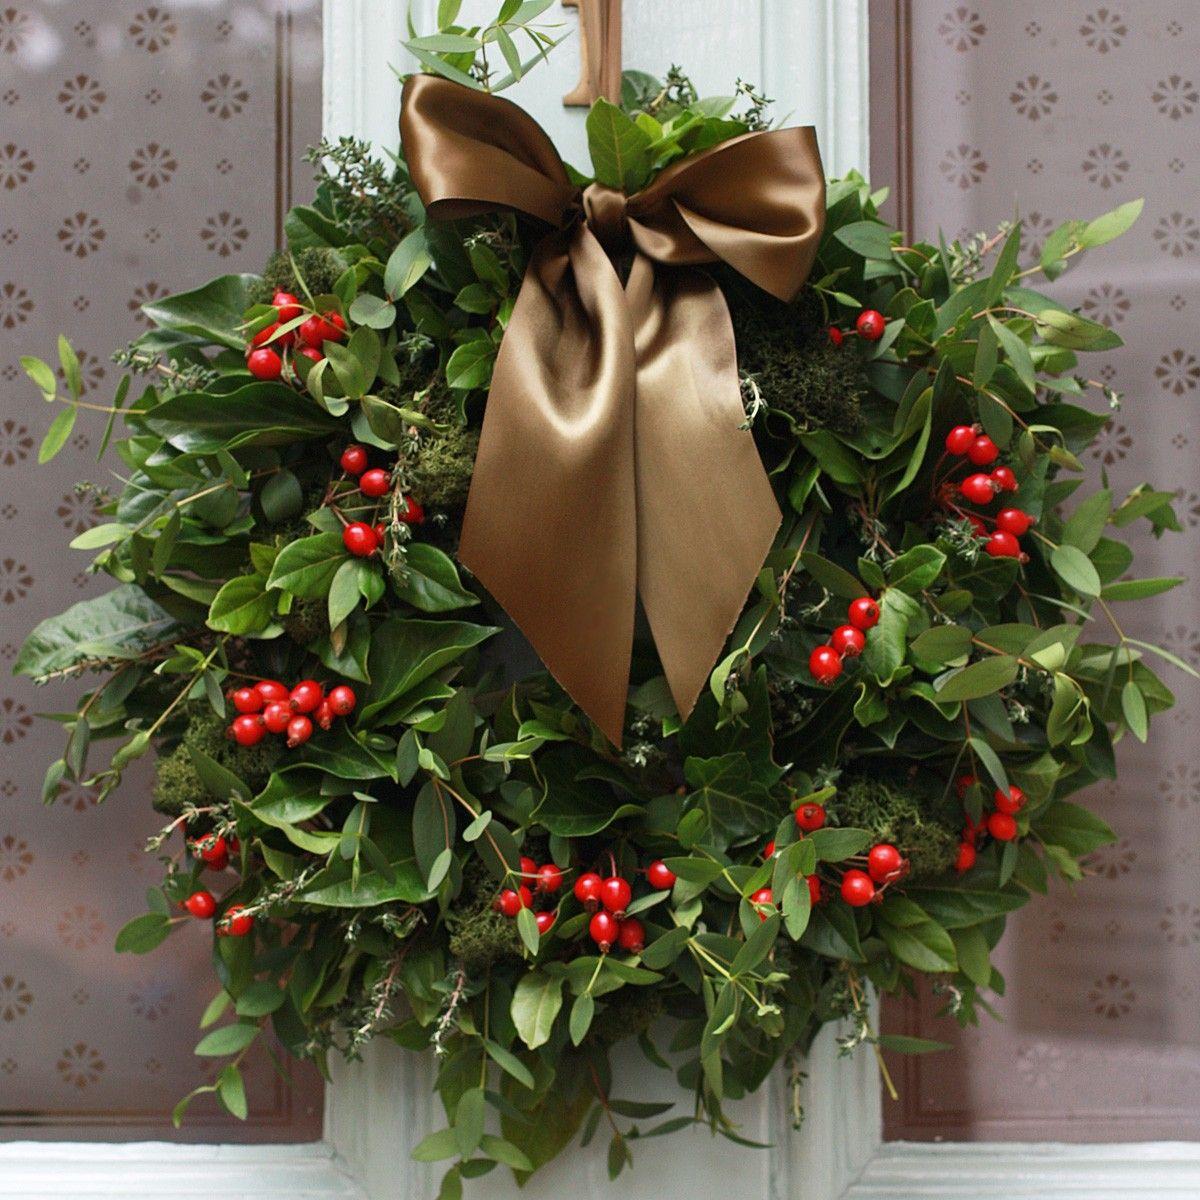 Beautiful Natural Christmas Wreath Composed Of Green Leaves